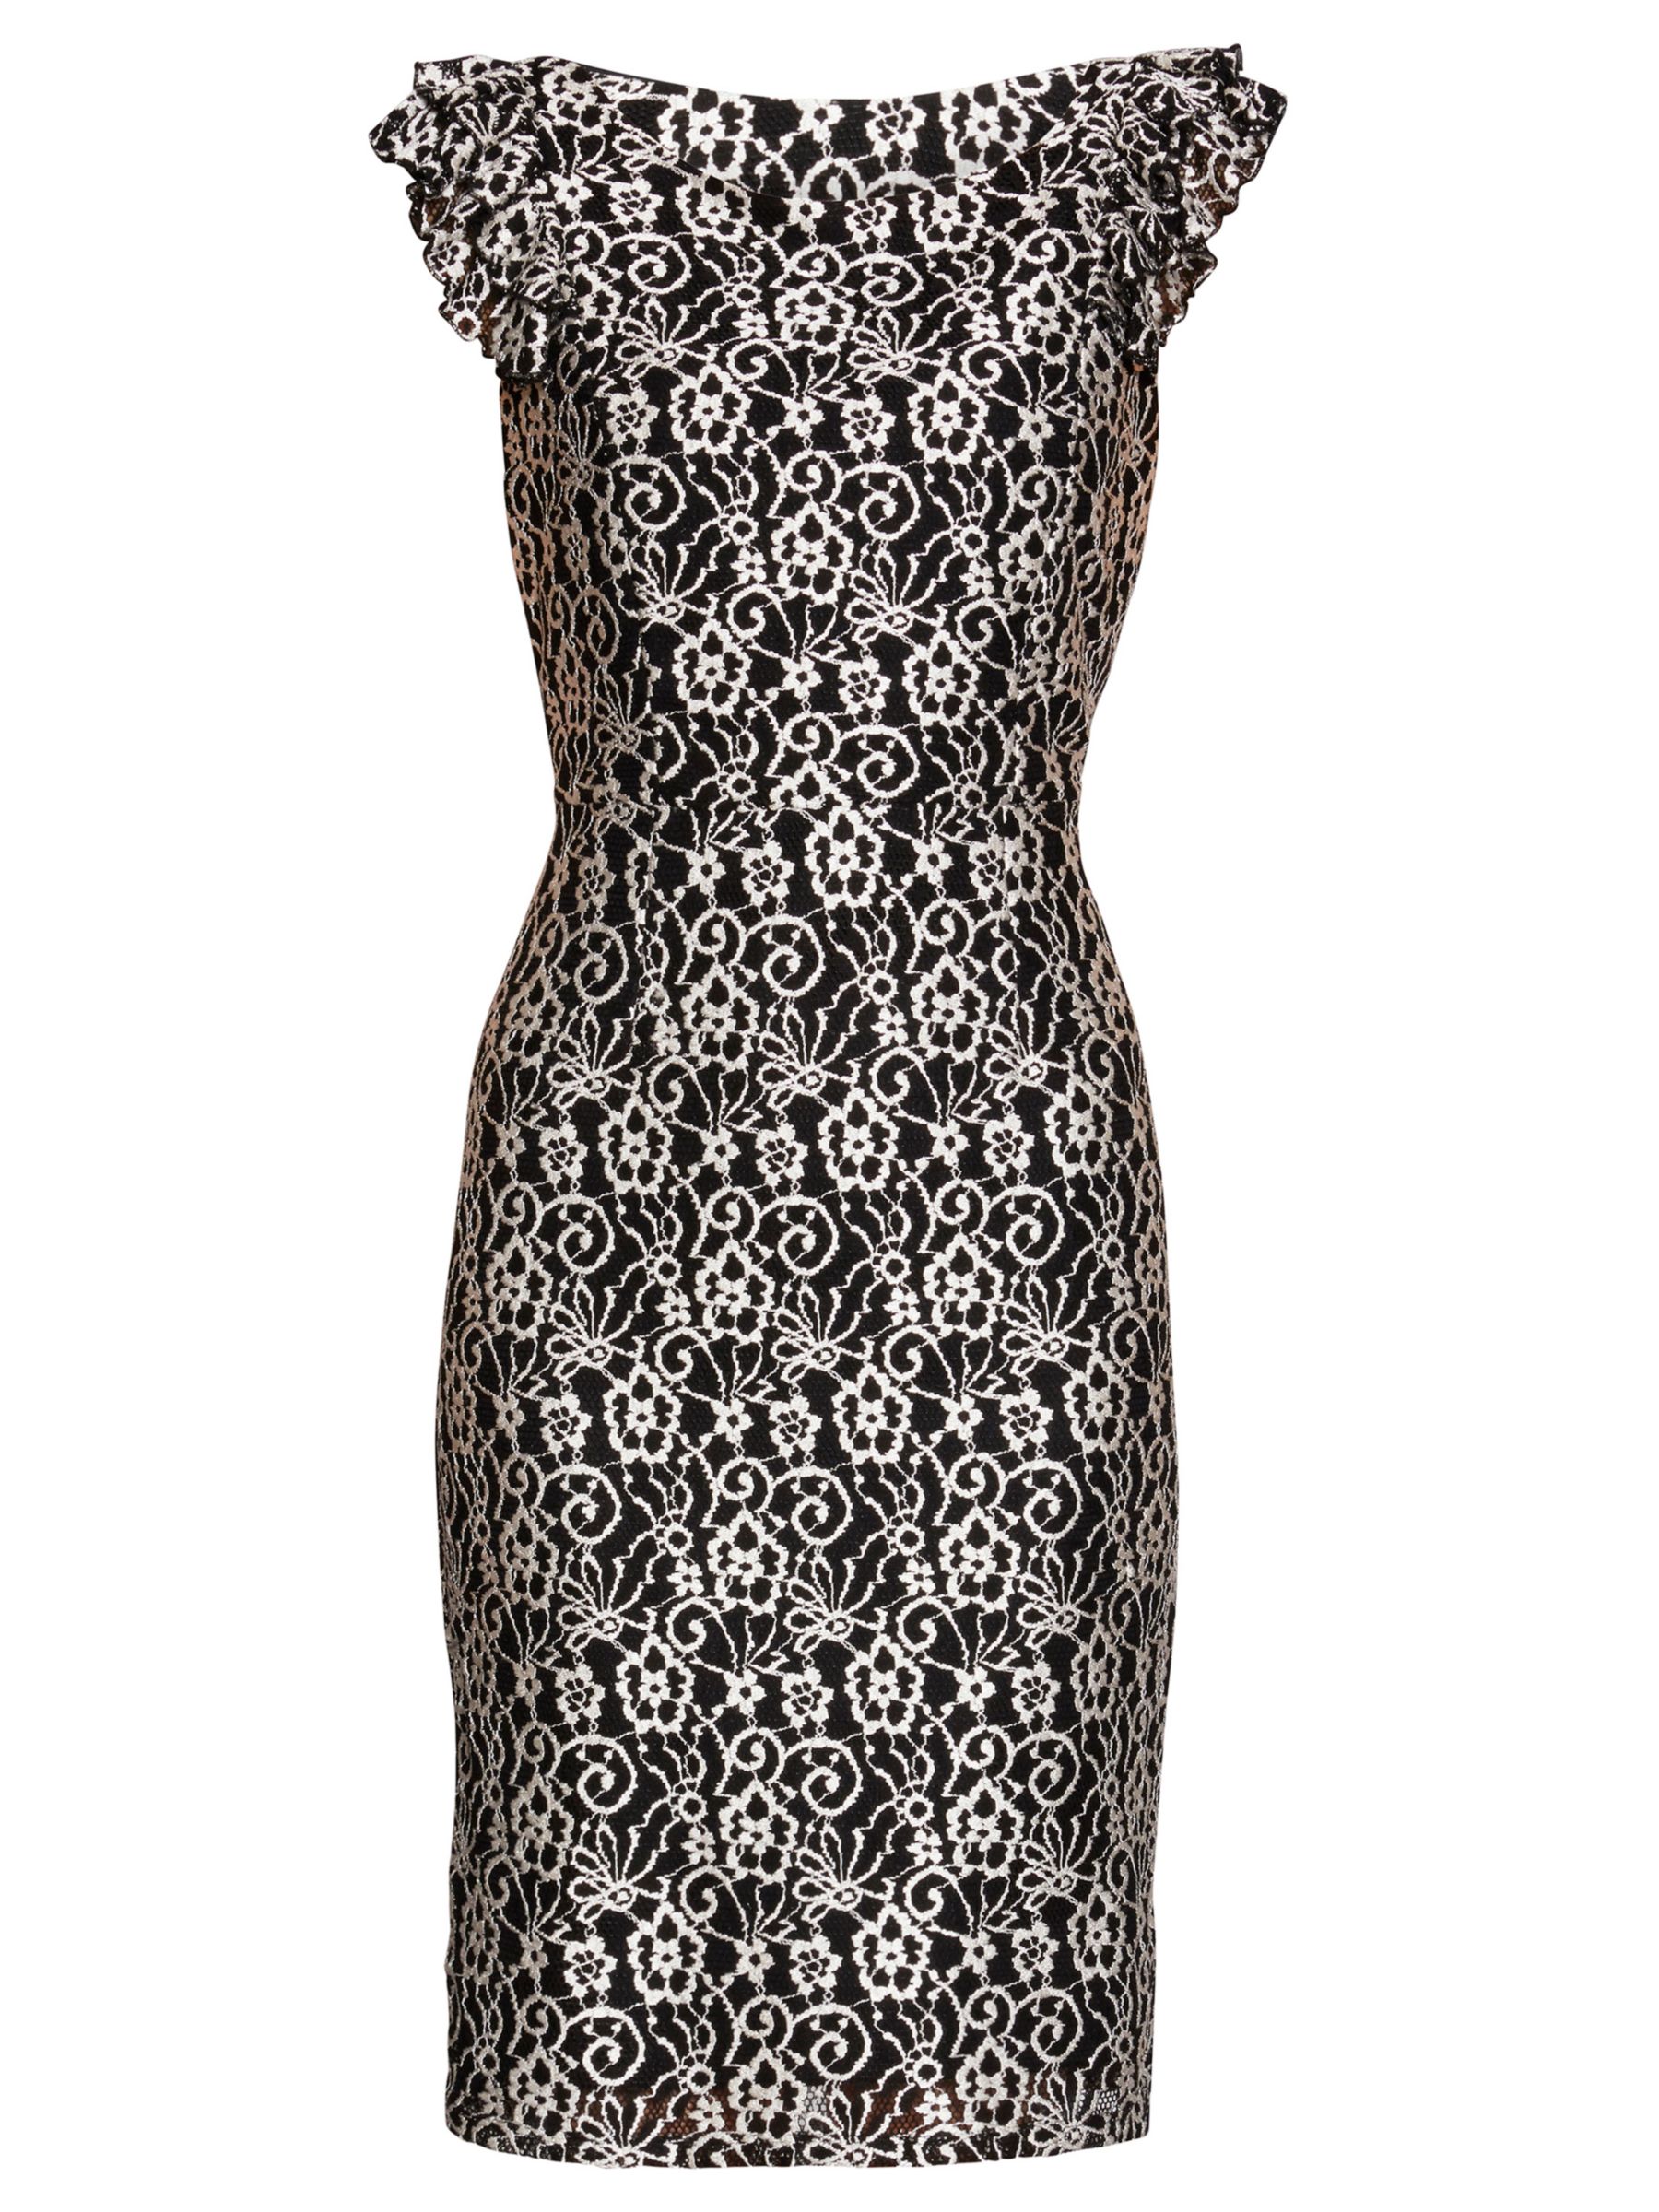 Gina Bacconi Stretch Floral Lace Dress, Black at John Lewis & Partners